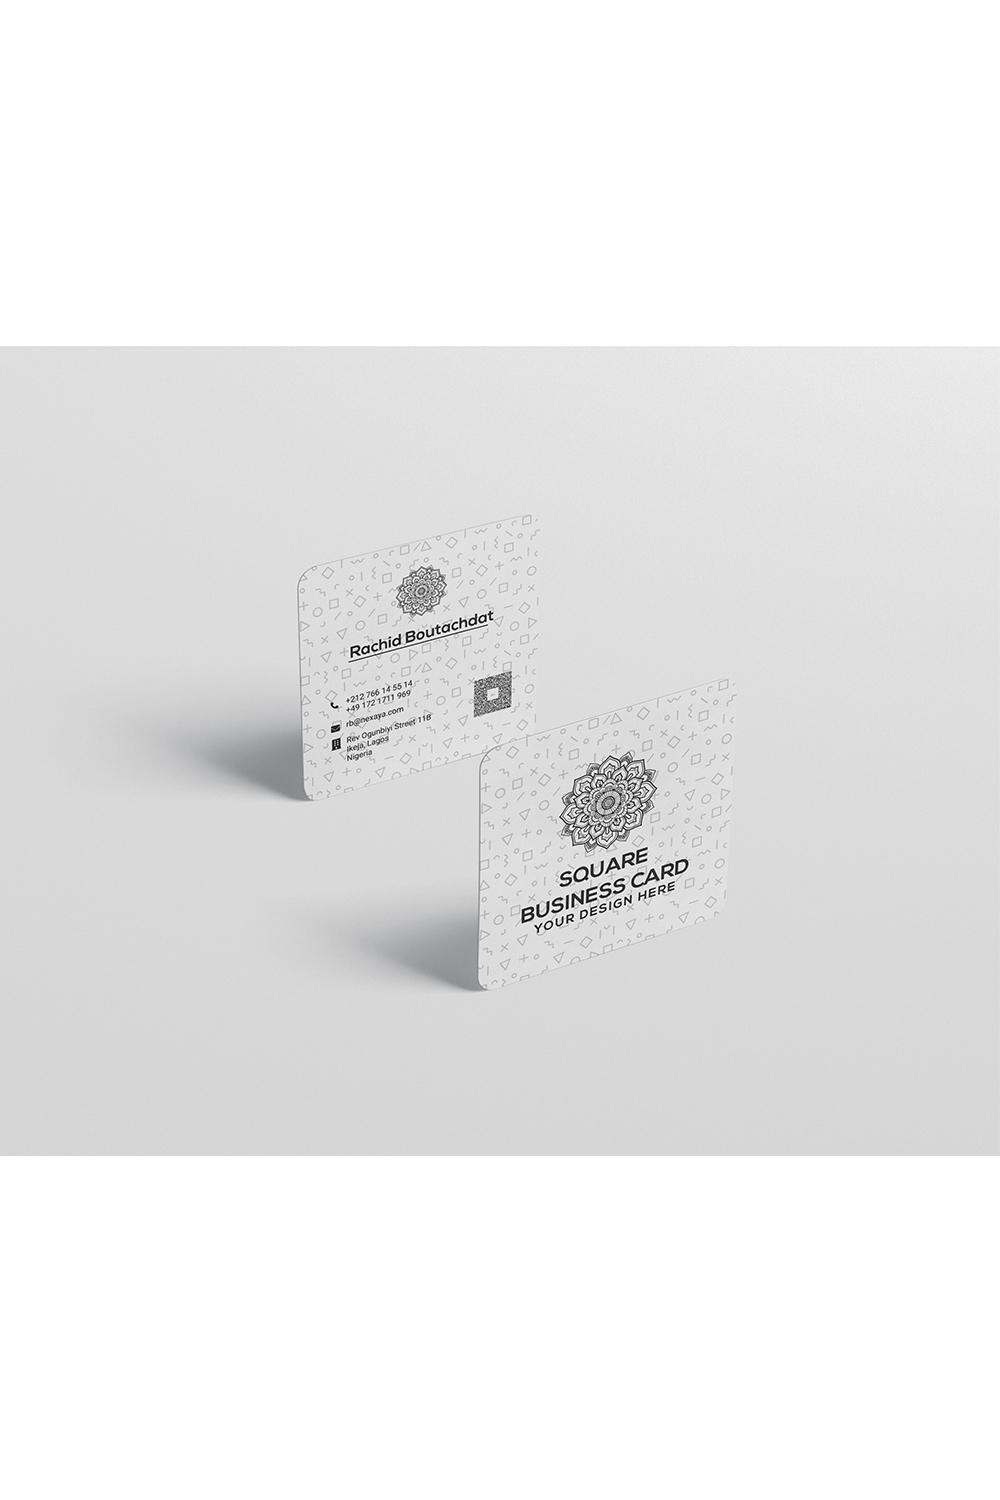 Square Round Corner Business Card Mockup pinterest preview image.